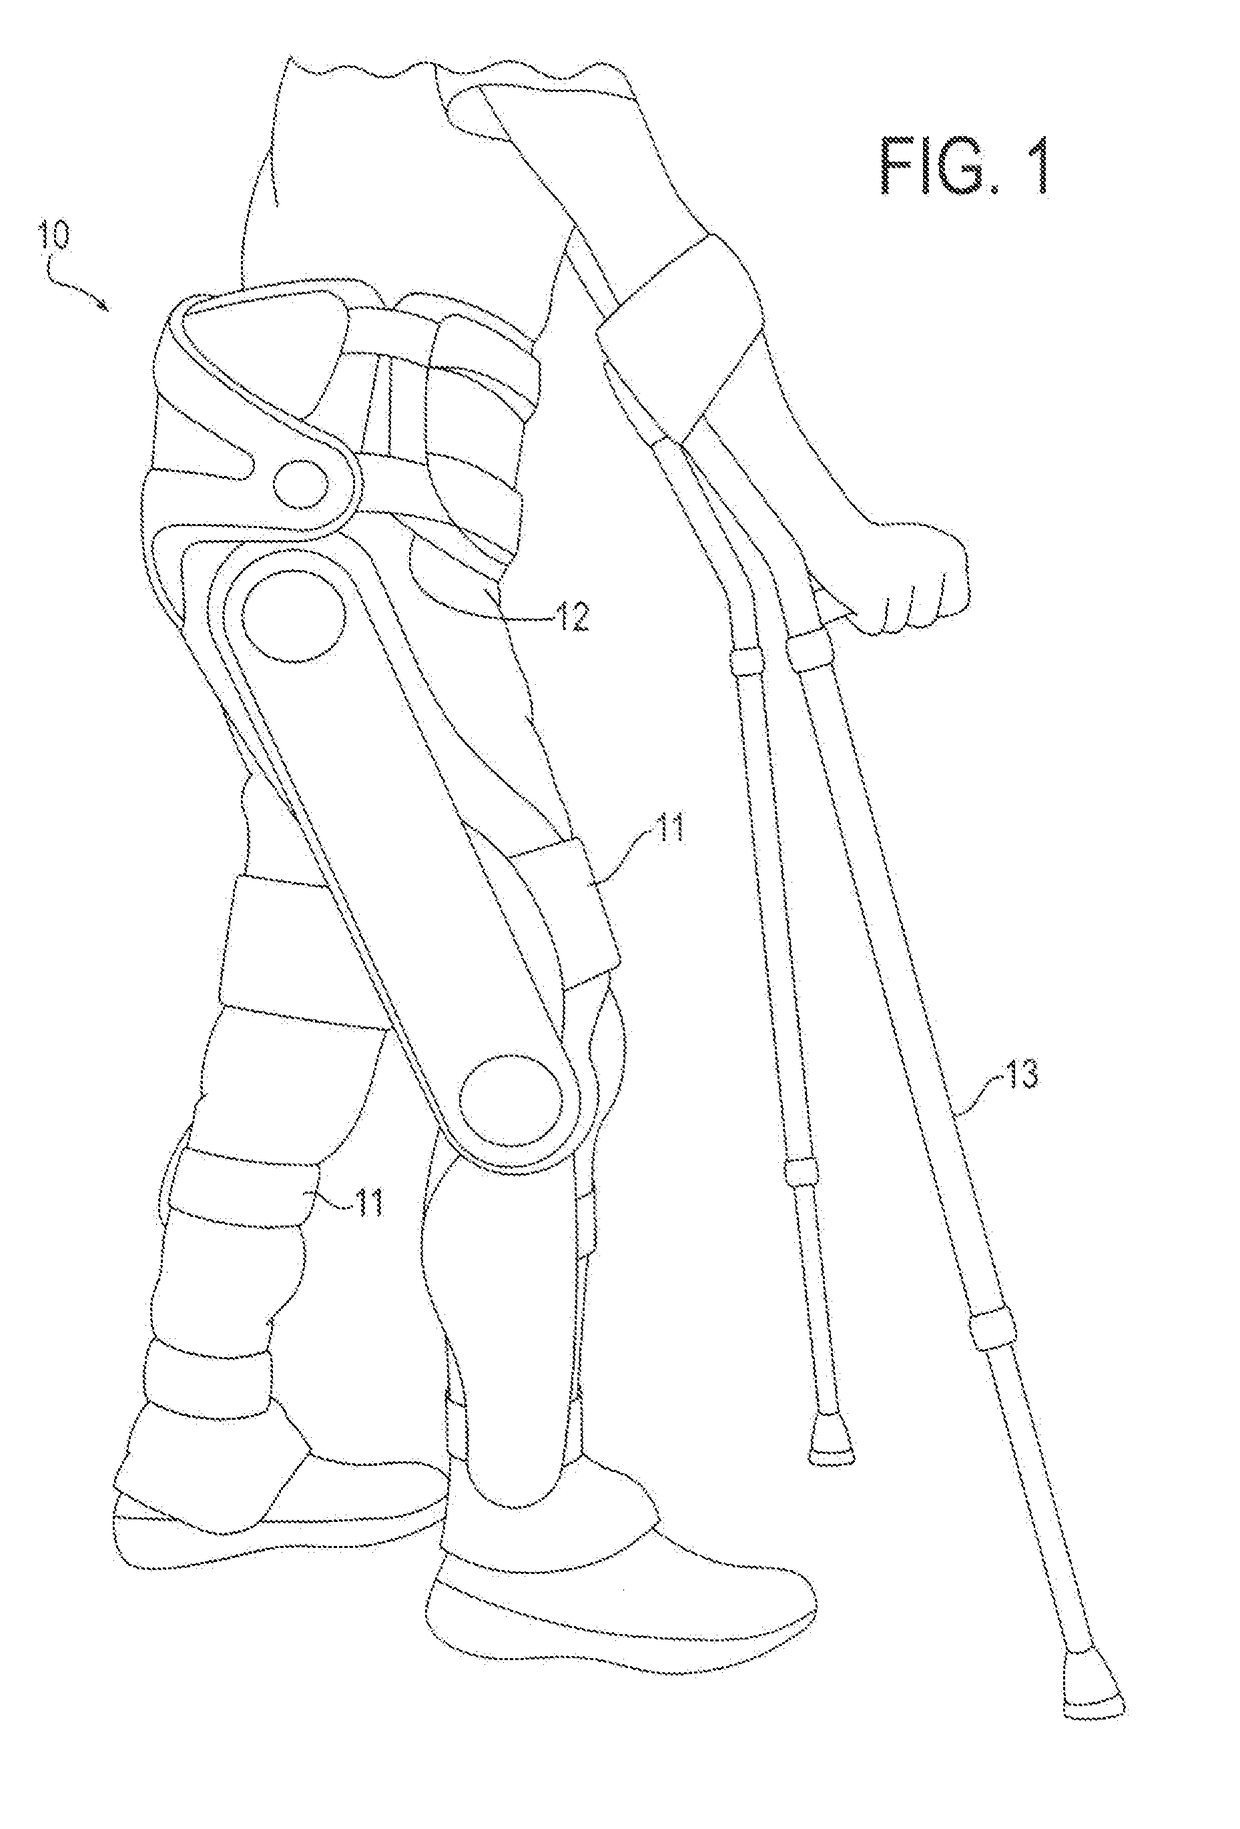 Fall mitigation and recovery methods for a legged mobility exoskeleton device